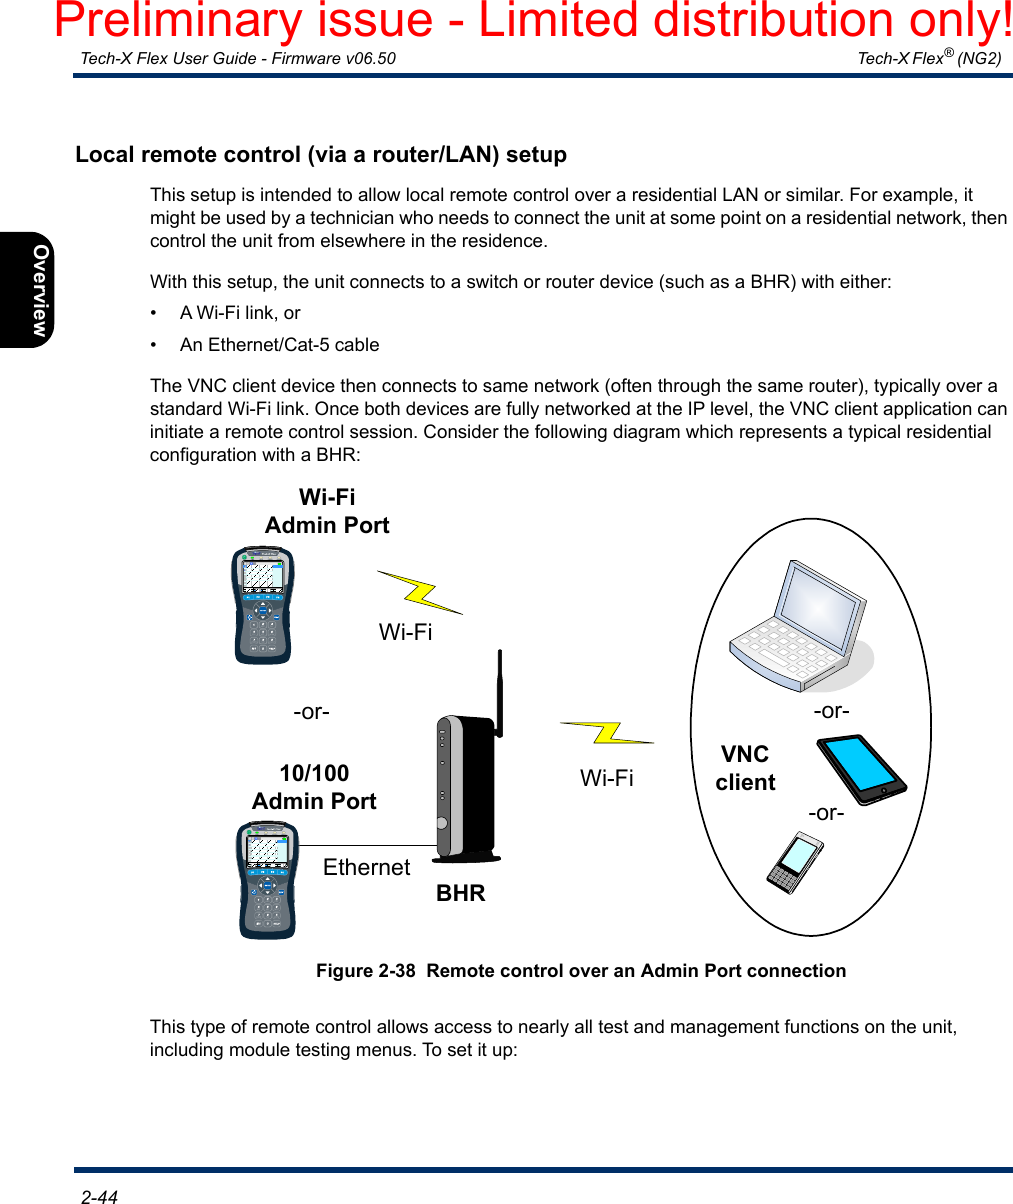  Tech-X Flex User Guide - Firmware v06.50   Tech-X Flex® (NG2)  2-44Intro Overview Wi-Fi Ethernet System IP/Video MoCA RF SpecsLocal remote control (via a router/LAN) setupThis setup is intended to allow local remote control over a residential LAN or similar. For example, it might be used by a technician who needs to connect the unit at some point on a residential network, then control the unit from elsewhere in the residence.With this setup, the unit connects to a switch or router device (such as a BHR) with either:• A Wi-Fi link, or• An Ethernet/Cat-5 cableThe VNC client device then connects to same network (often through the same router), typically over a standard Wi-Fi link. Once both devices are fully networked at the IP level, the VNC client application can initiate a remote control session. Consider the following diagram which represents a typical residential configuration with a BHR:Figure 2-38  Remote control over an Admin Port connectionThis type of remote control allows access to nearly all test and management functions on the unit, including module testing menus. To set it up:-or--or-Wi-FiBHRWi-FiVNC client10/100Admin PortEthernetWi-FiAdmin Port-or-Preliminary issue - Limited distribution only!